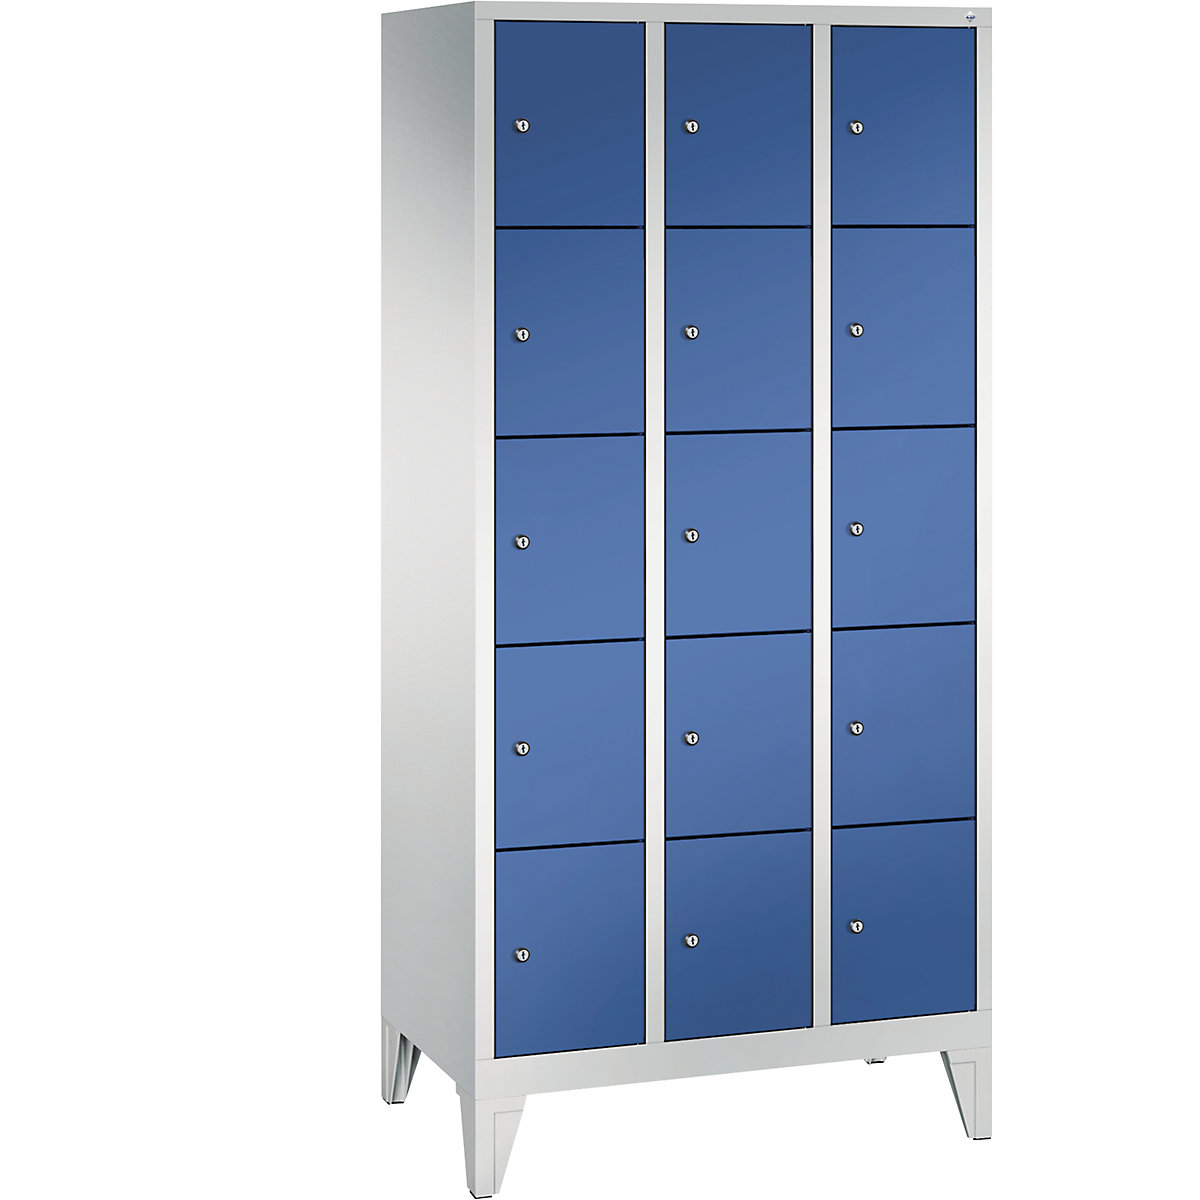 CLASSIC locker unit with feet – C+P, 3 compartments, 5 shelf compartments each, compartment width 300 mm, light grey / gentian blue-13